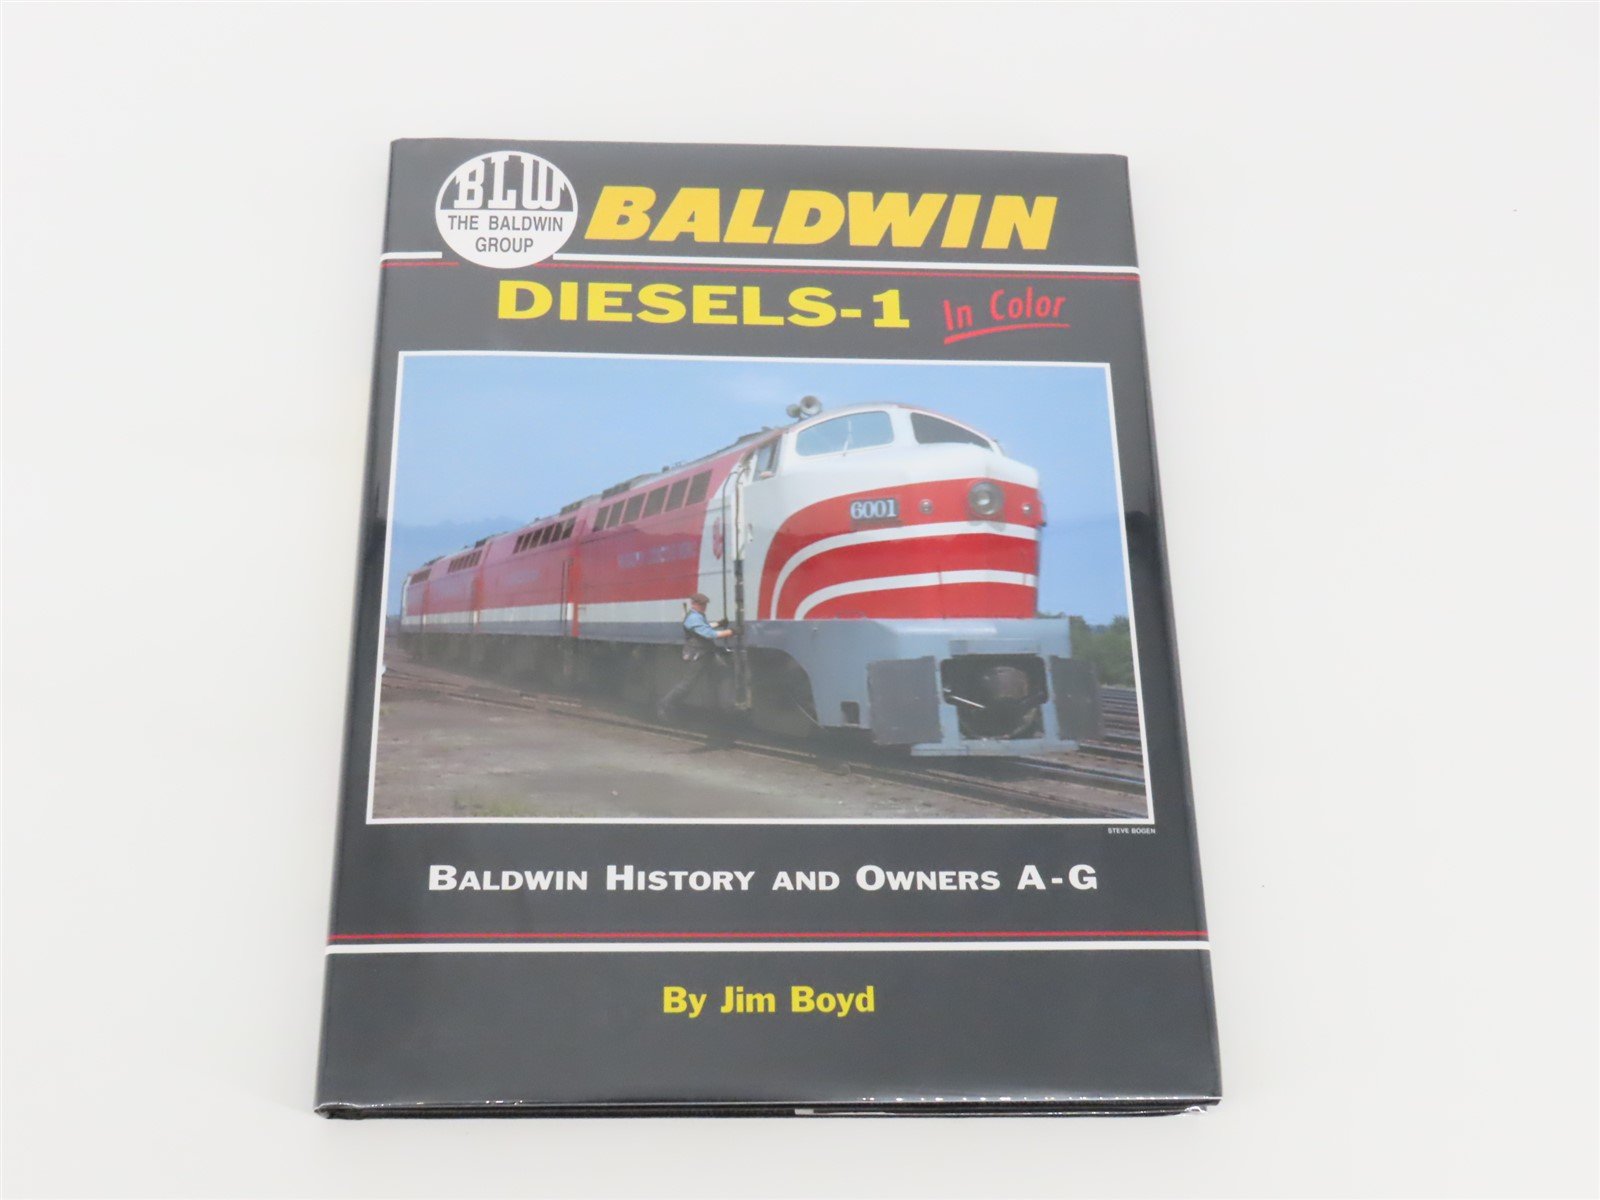 Morning Sun: Baldwin Diesels-1: History & Owners A-G by Jim Boyd ©2002 HC Book